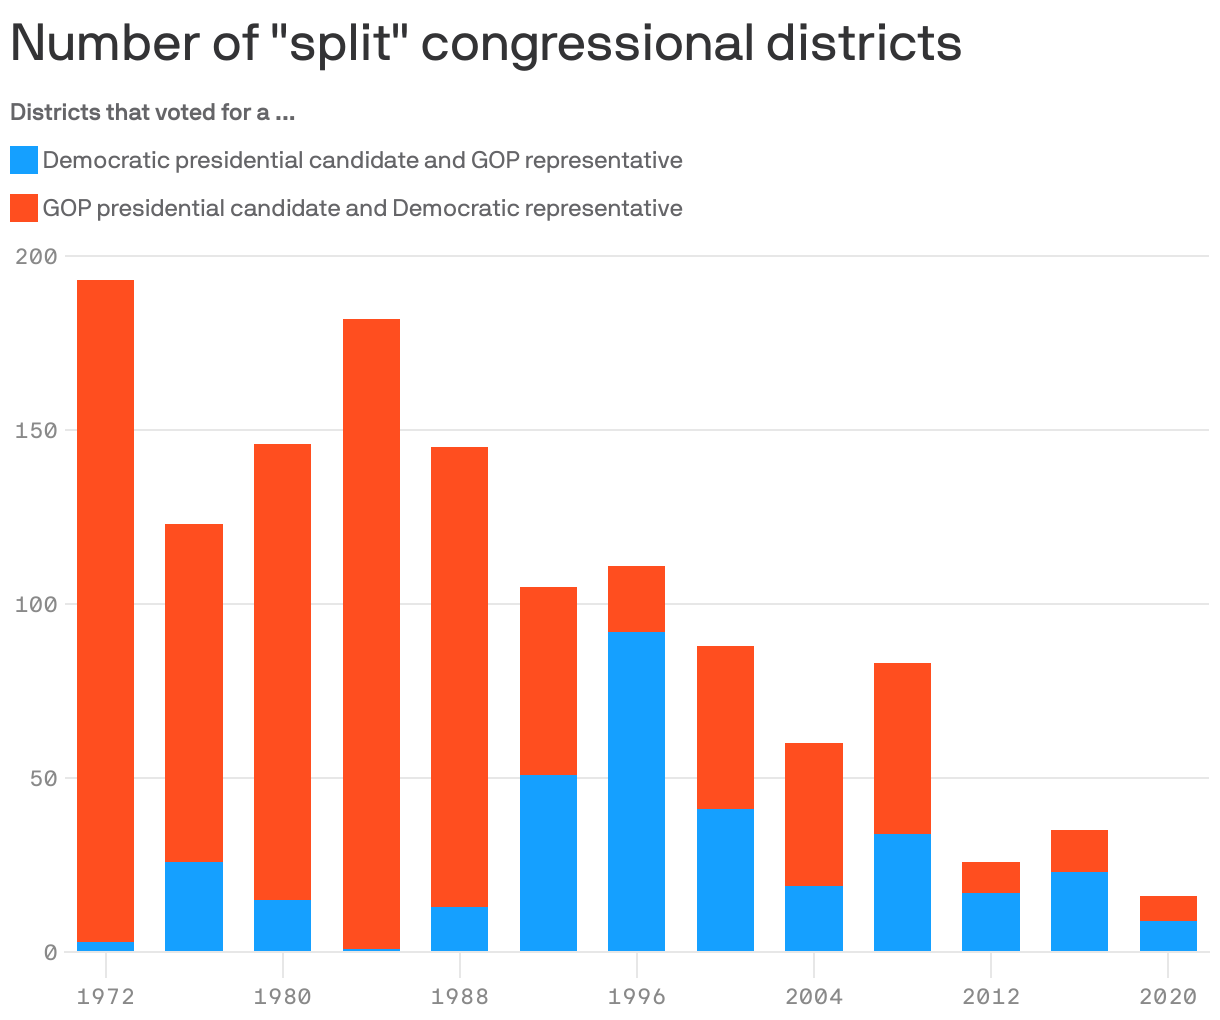 Number of "split" congressional districts